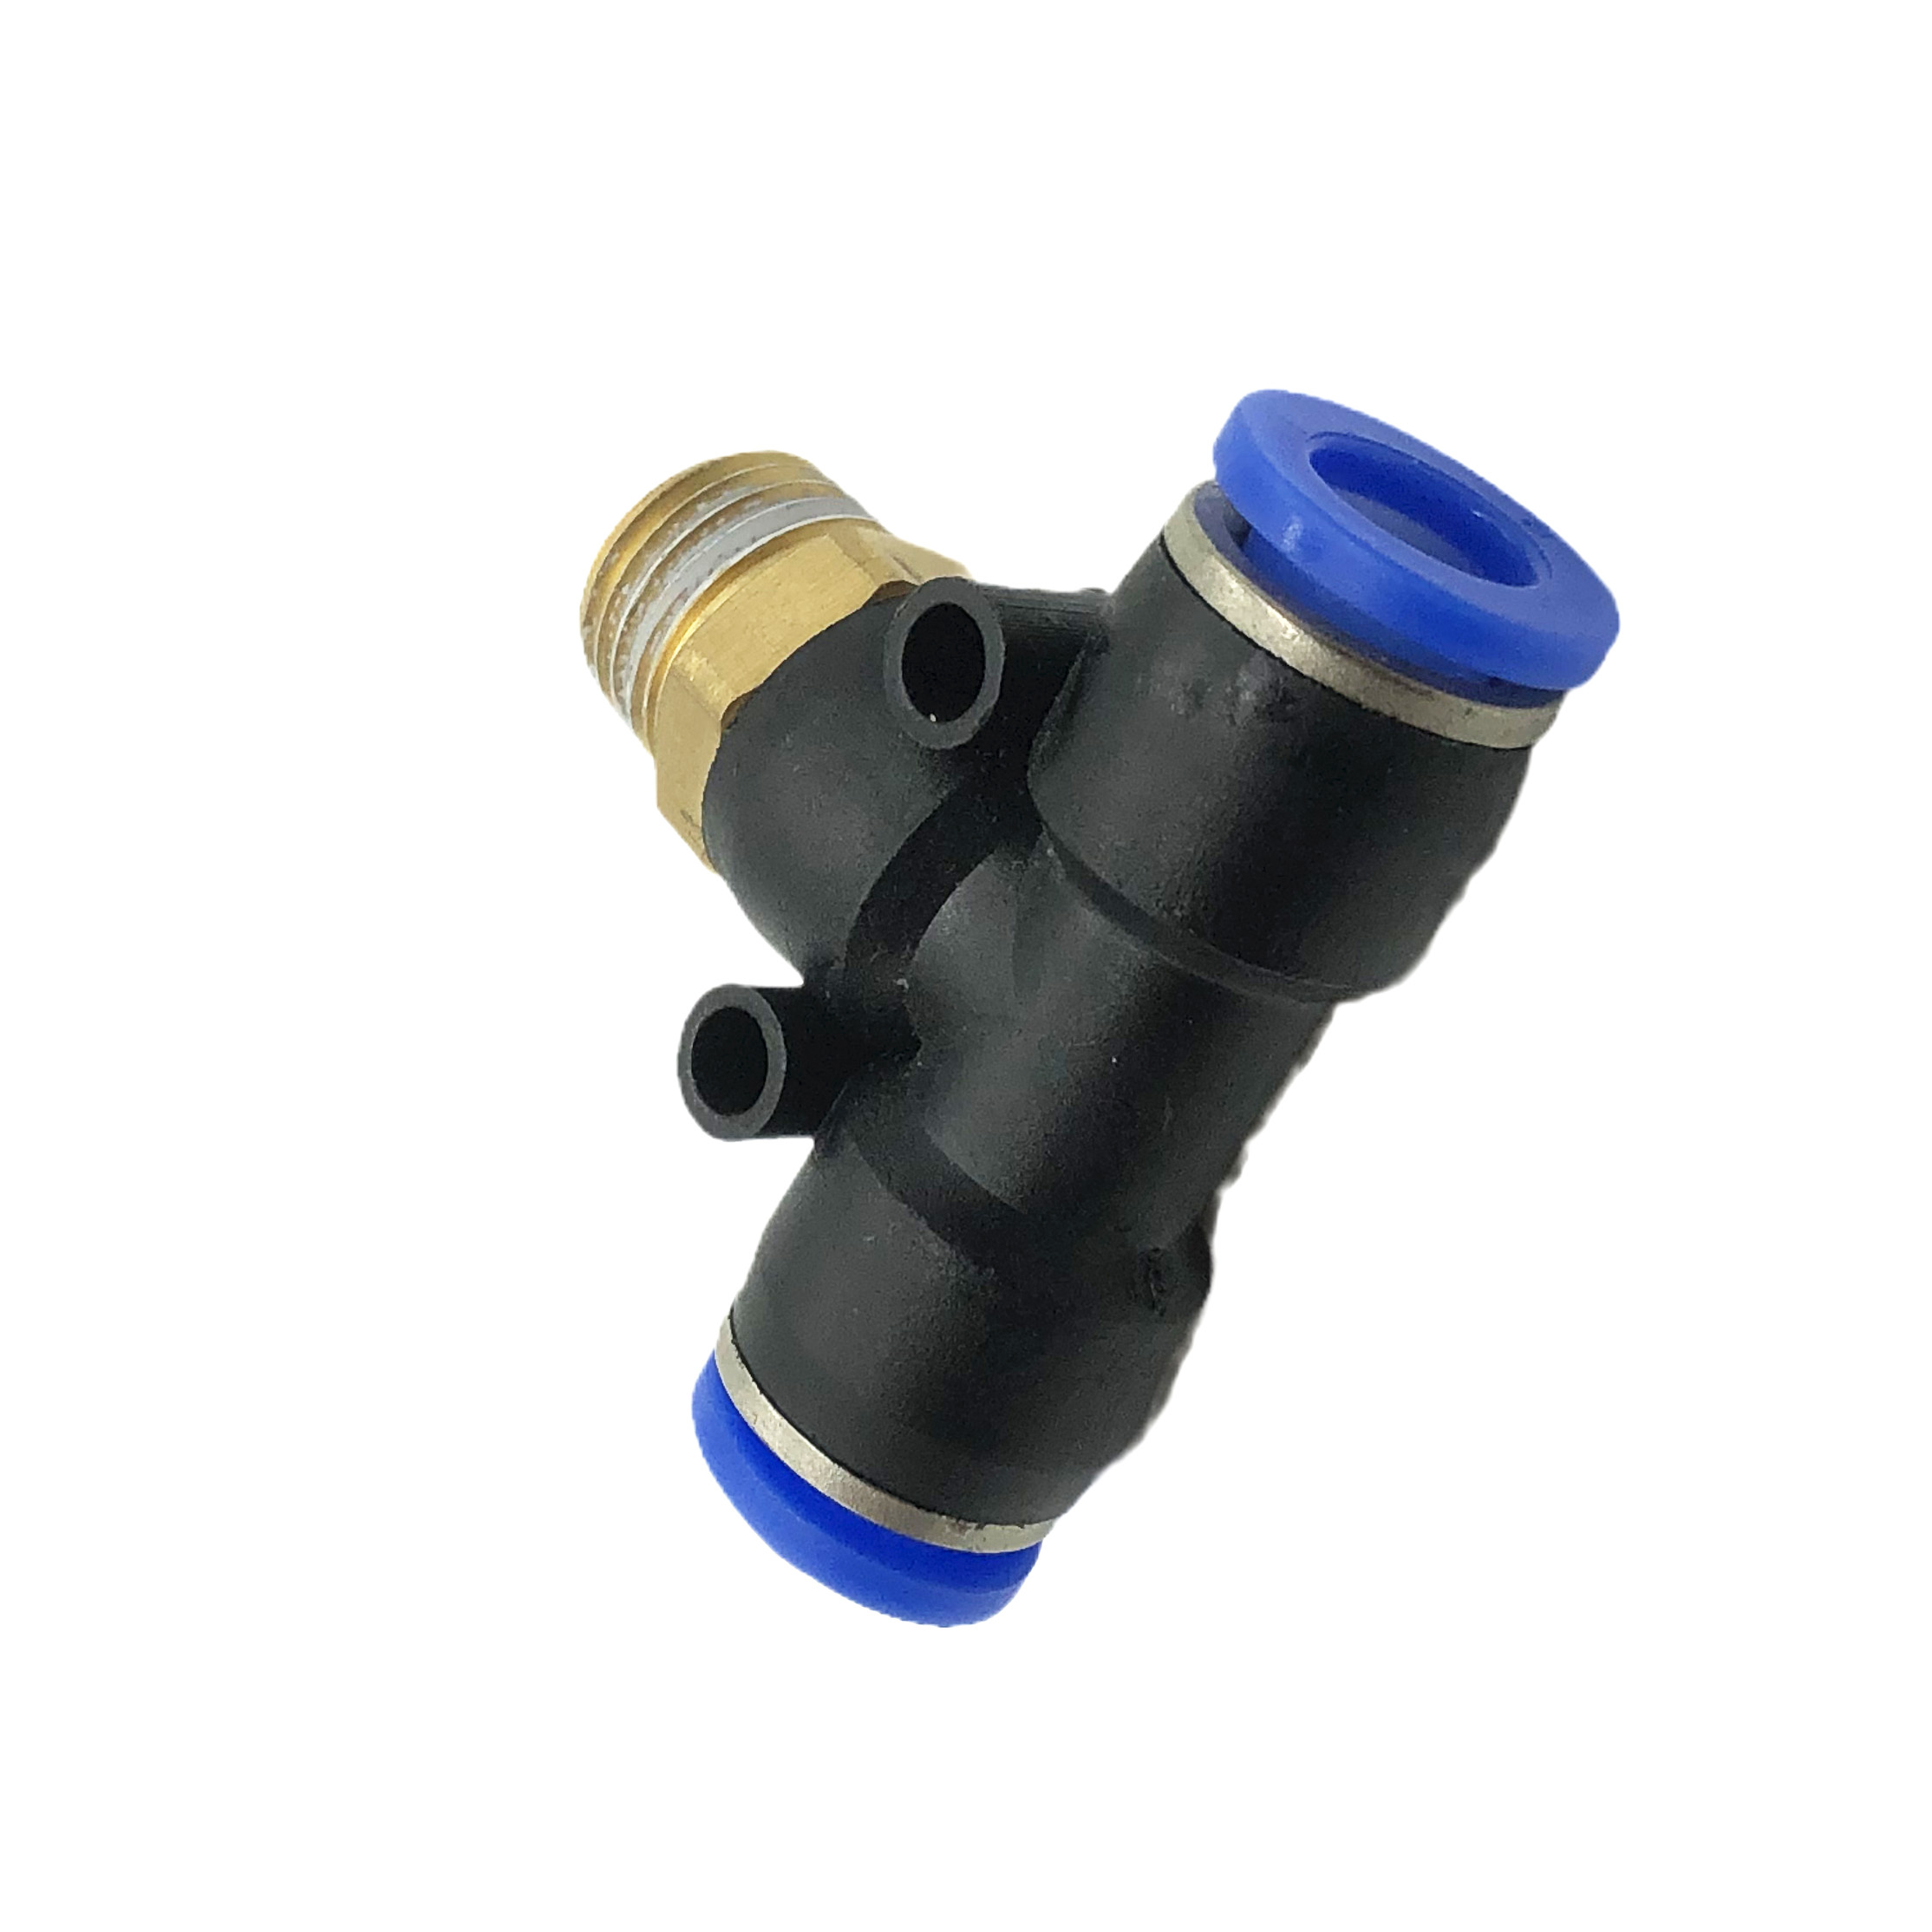 Joint Thread Positive Tee PB8-02 Gas Pipe Quick Insertion